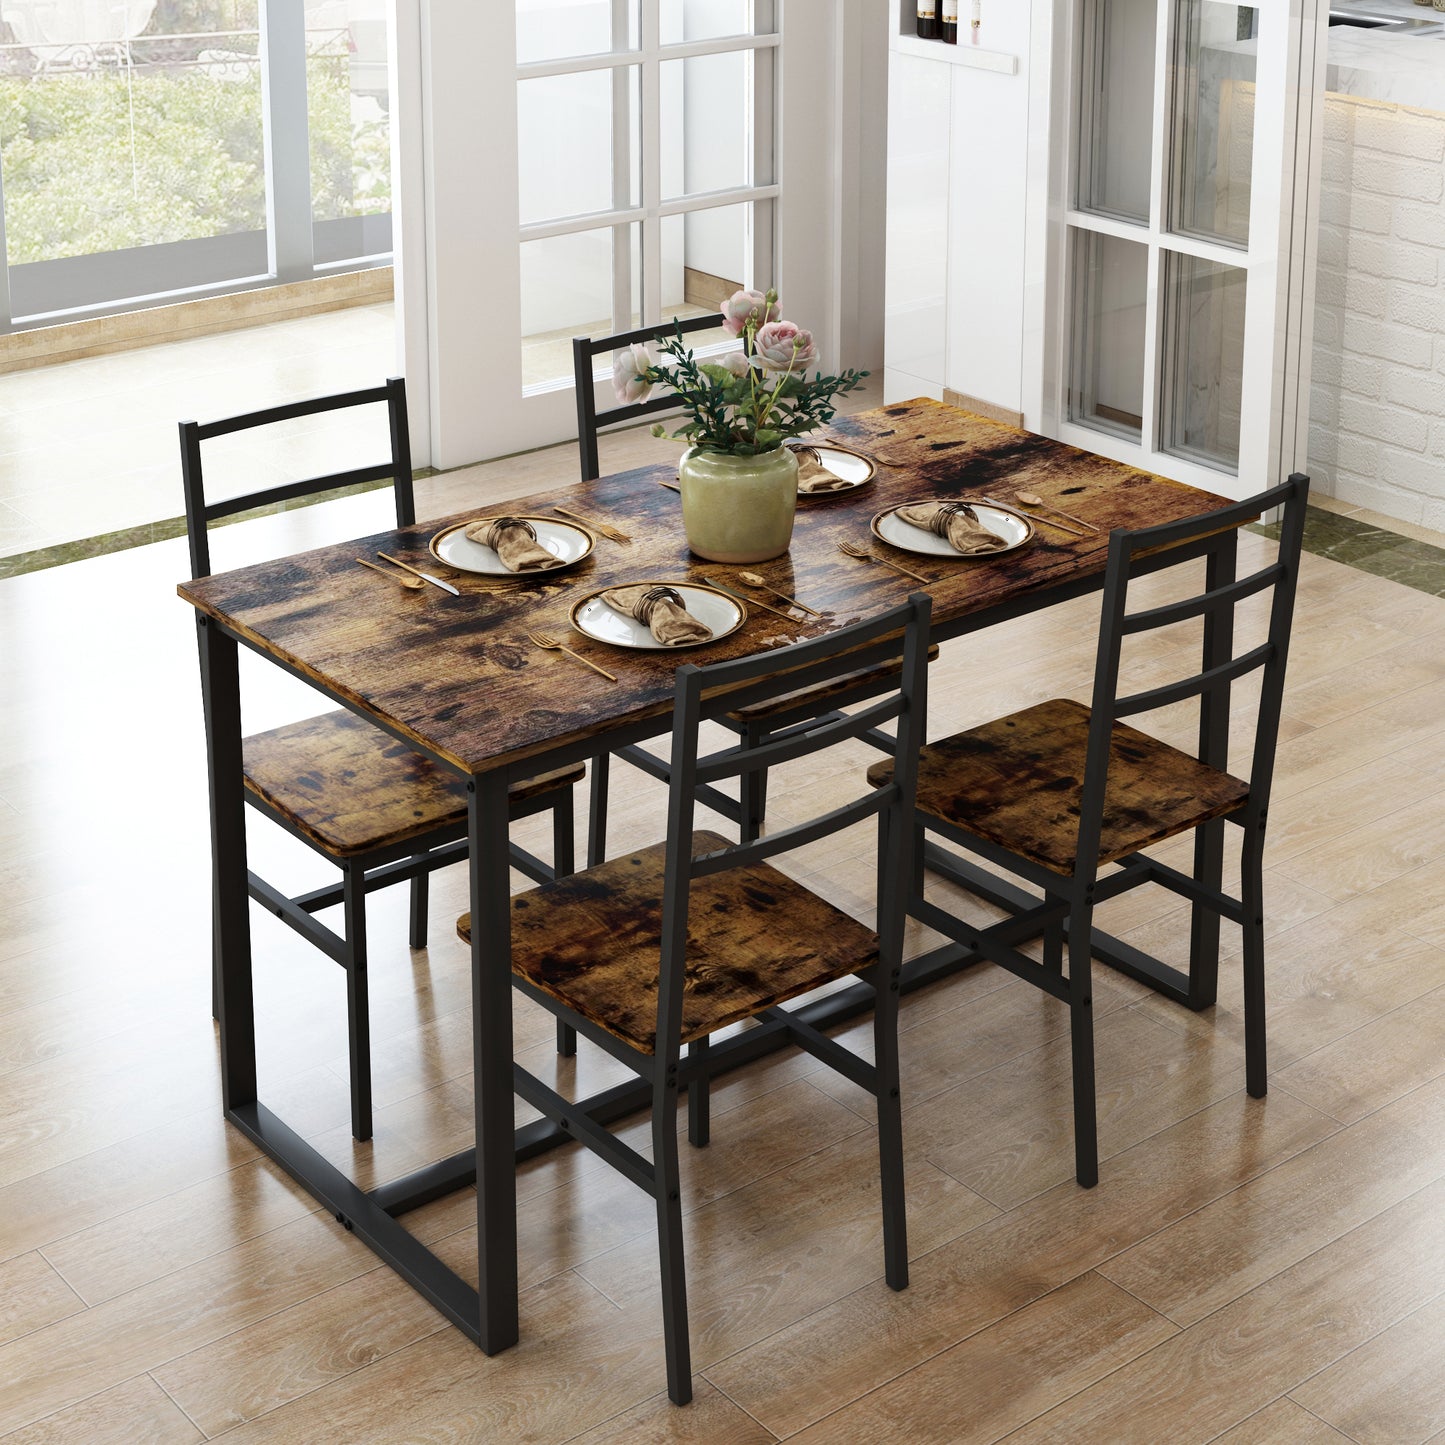 SYNGAR 5 Piece Dining Table Set, Modern Rustic Table and Chairs Set for 4, Home Kitchen Breakfast Table Set, Dinette Table Set with 4 Chairs, Wooden Tabletop and Steel Frame, D6114